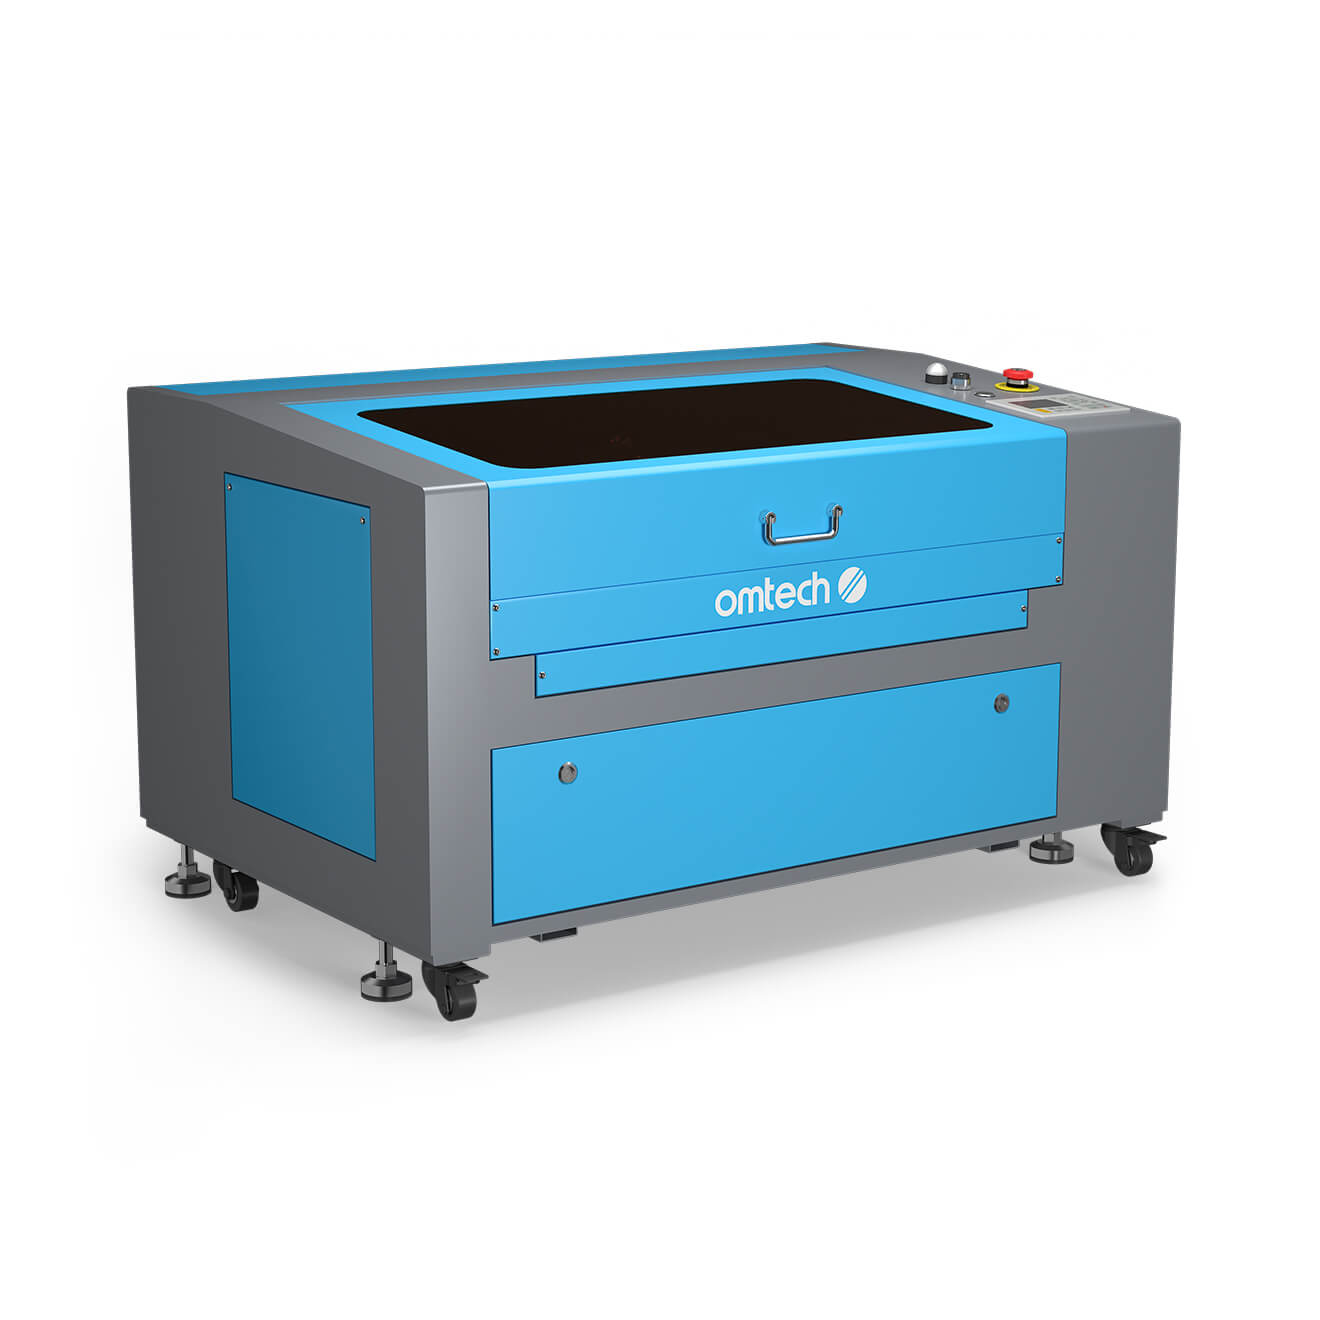 60W CO2 Laser Engraving Machine & Cutter with 600x400mm Engraving Area | Turbo-646